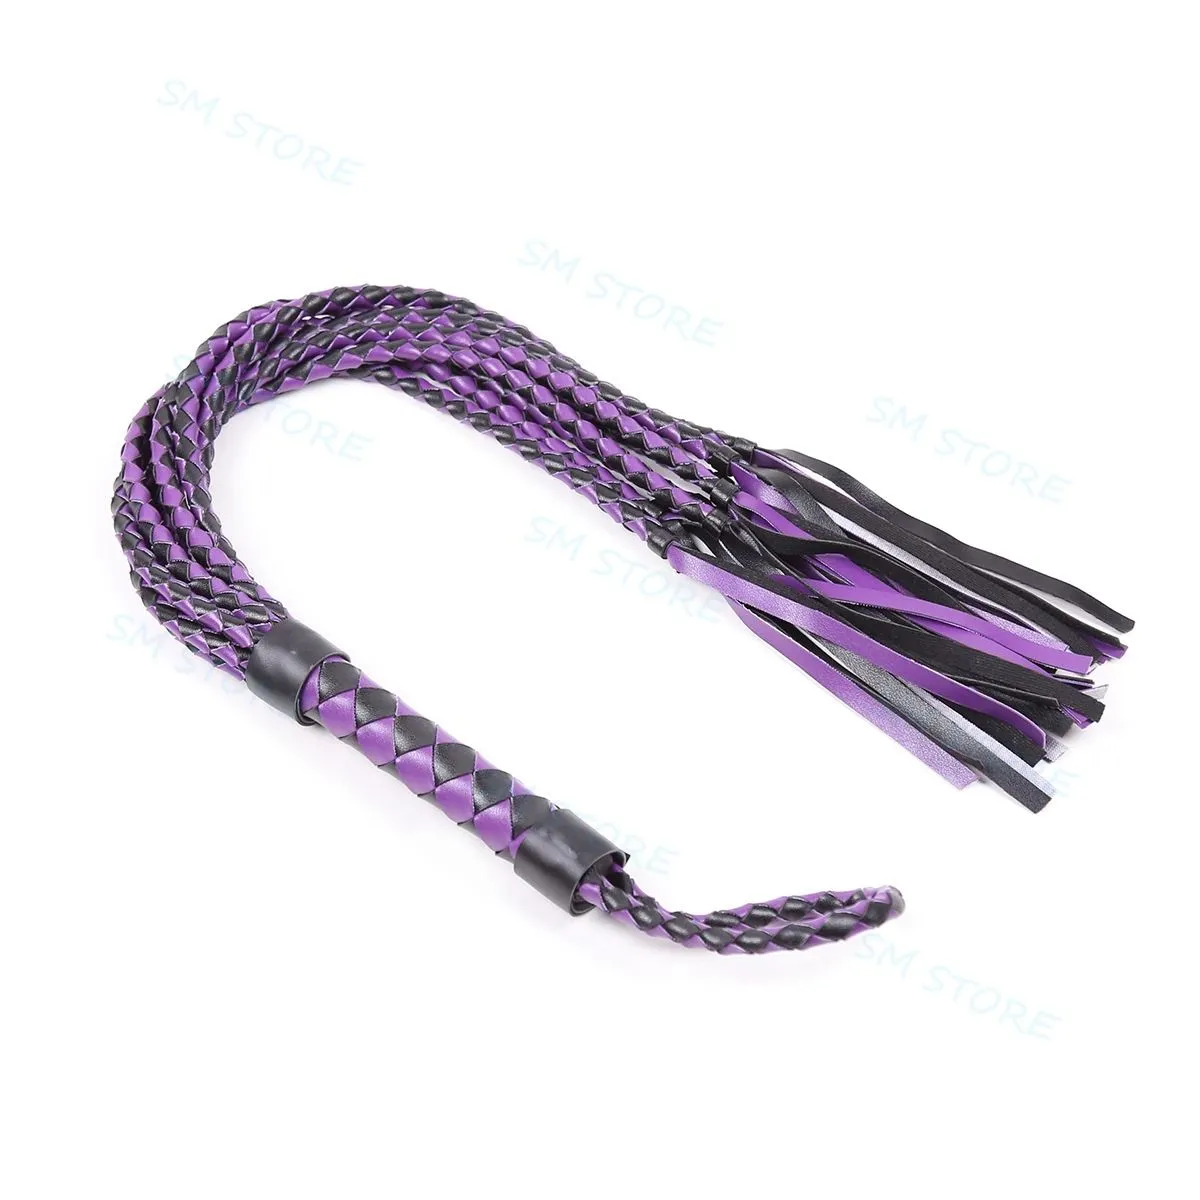 Bondage New Fantasy Leather Weave Whip Riding Crop Party Flogger Queen Sexy Game Toys 562A